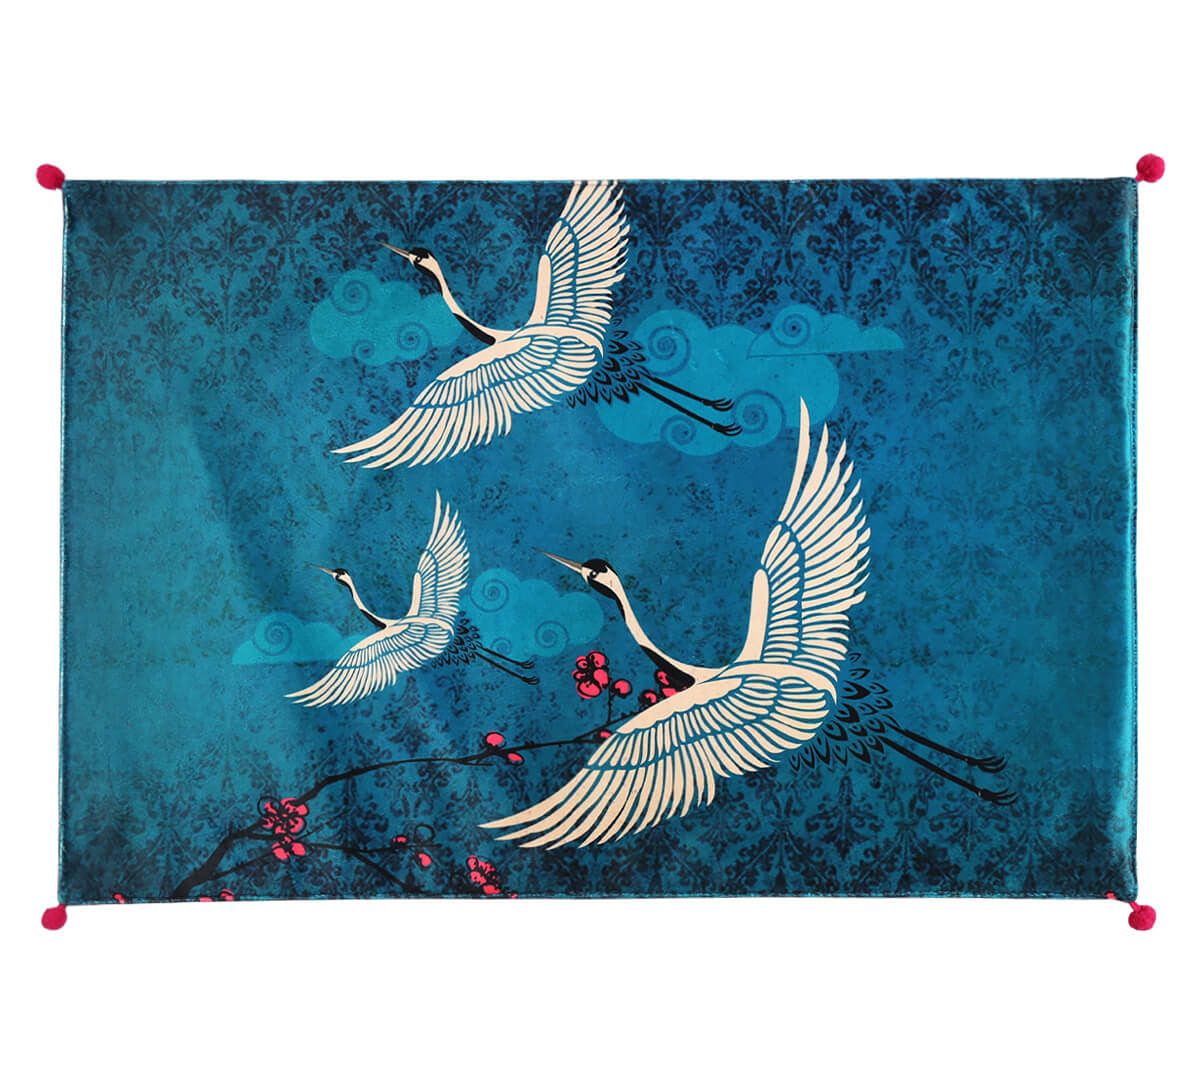 India Circus by Krsnaa Mehta Legend of the Cranes Micro Velvet Table Mats Set of 6